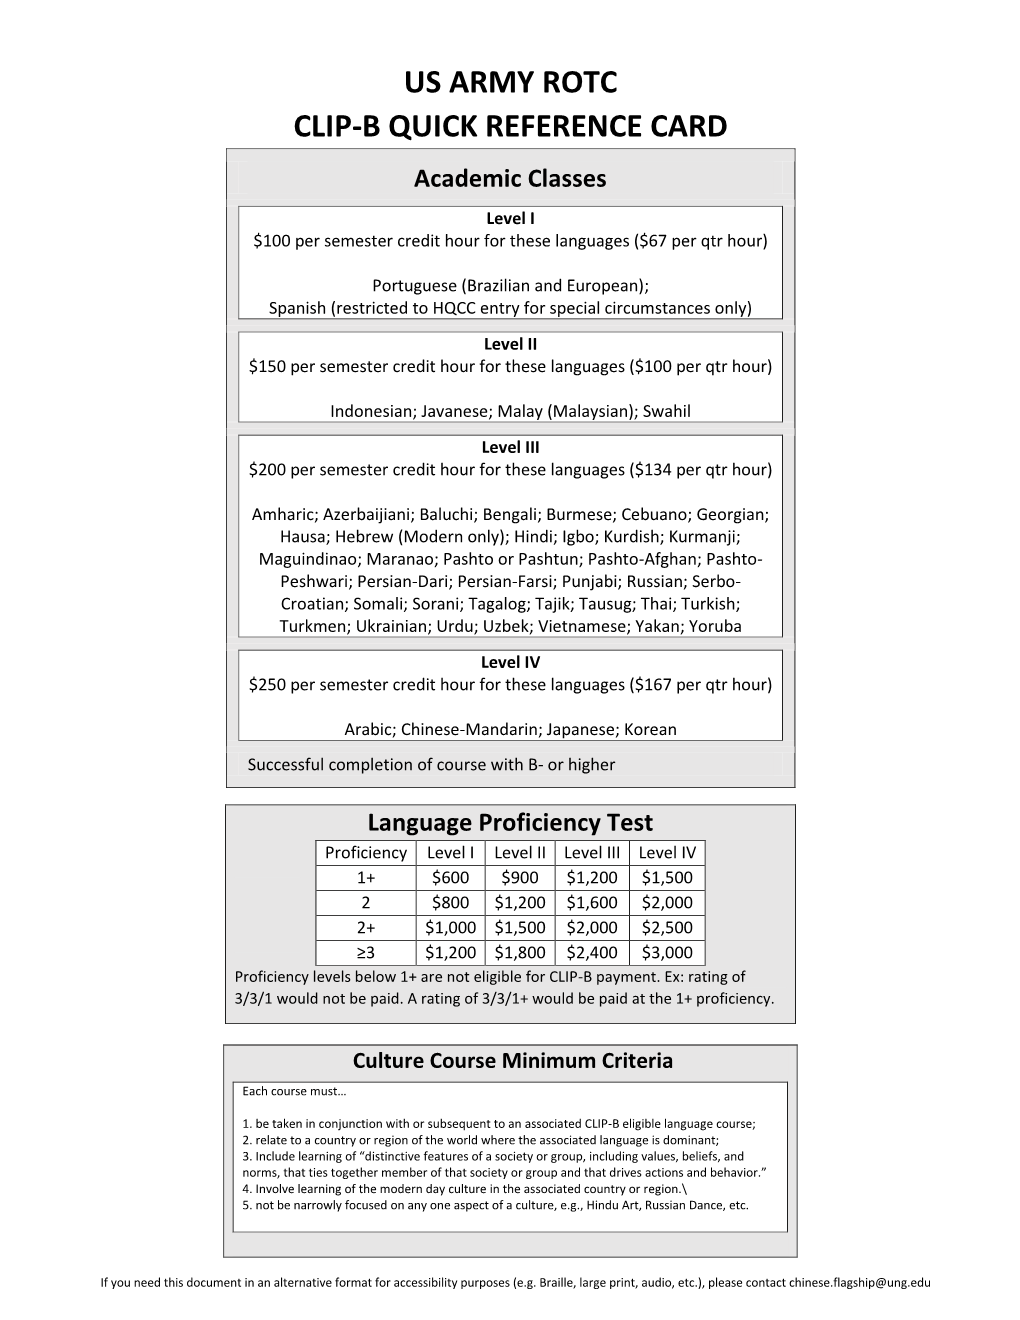 US ARMY ROTC CLIP-B QUICK REFERENCE CARD Academic Classes Level I $100 Per Semester Credit Hour for These Languages ($67 Per Qtr Hour)